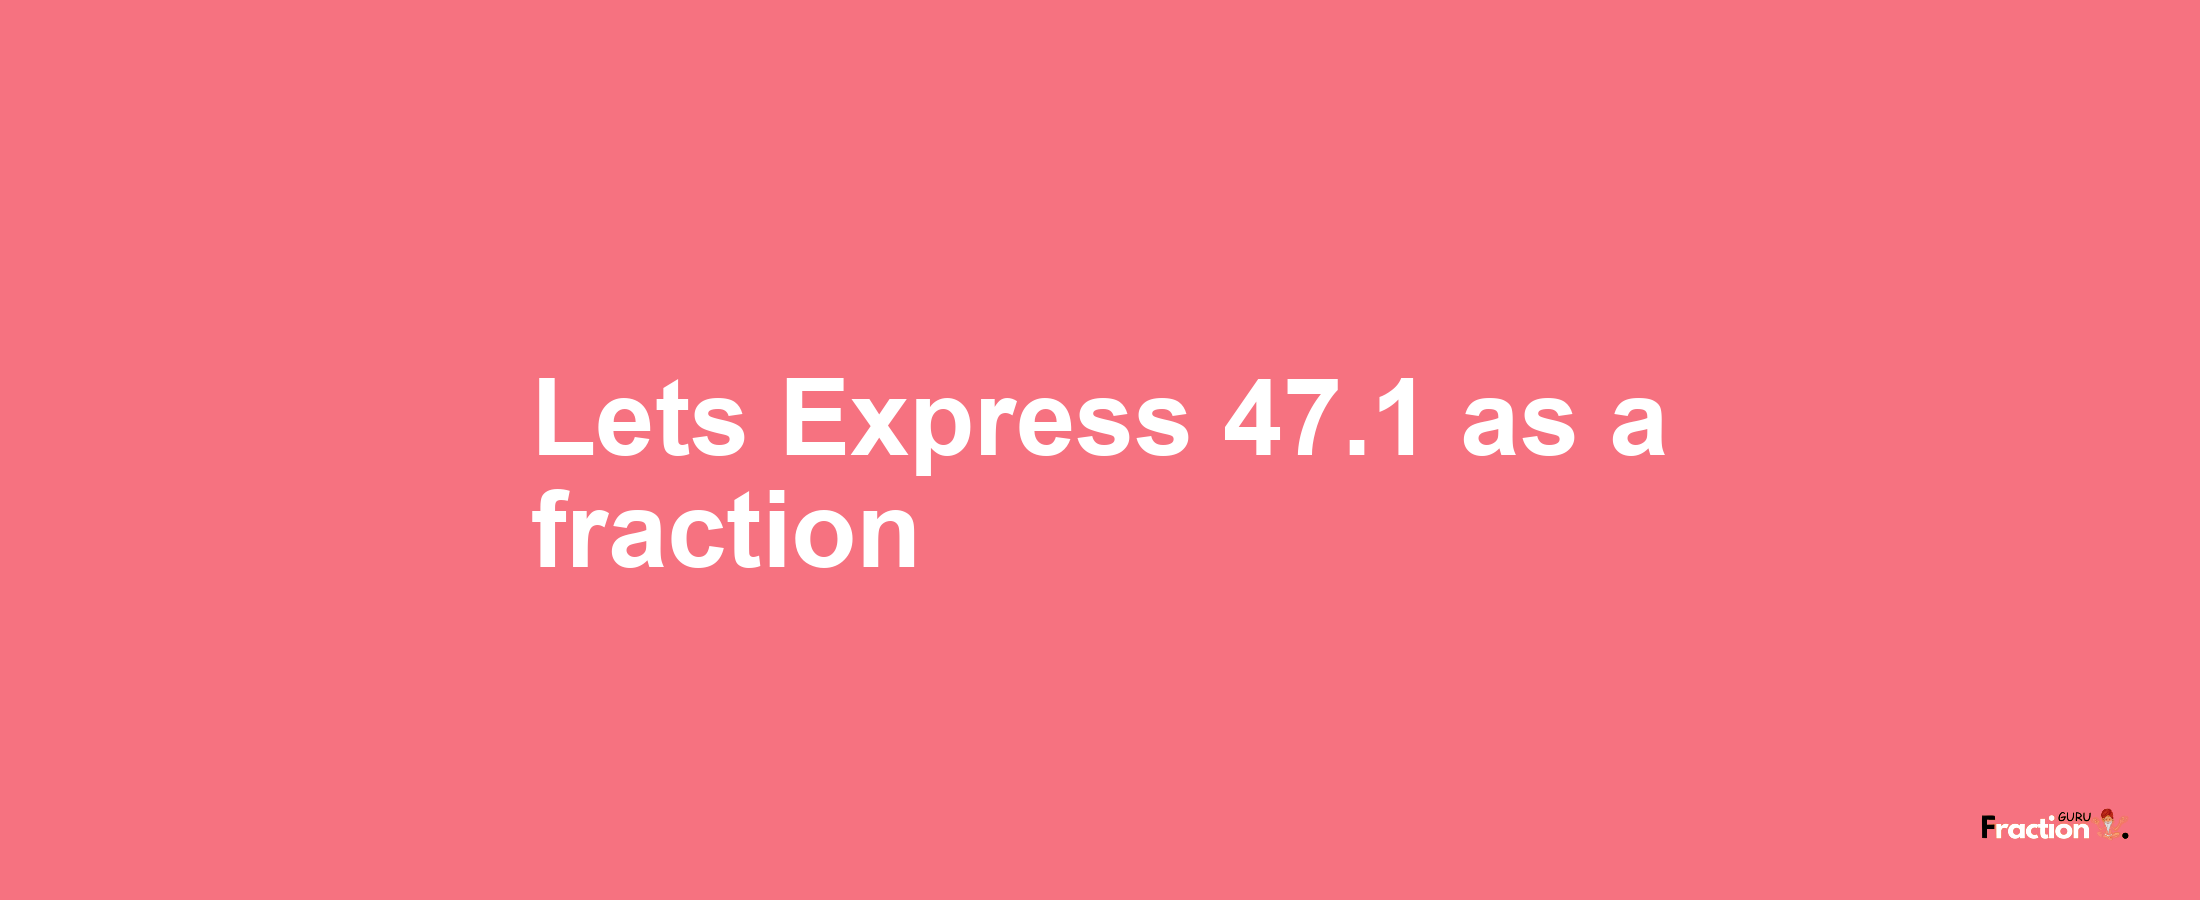 Lets Express 47.1 as afraction